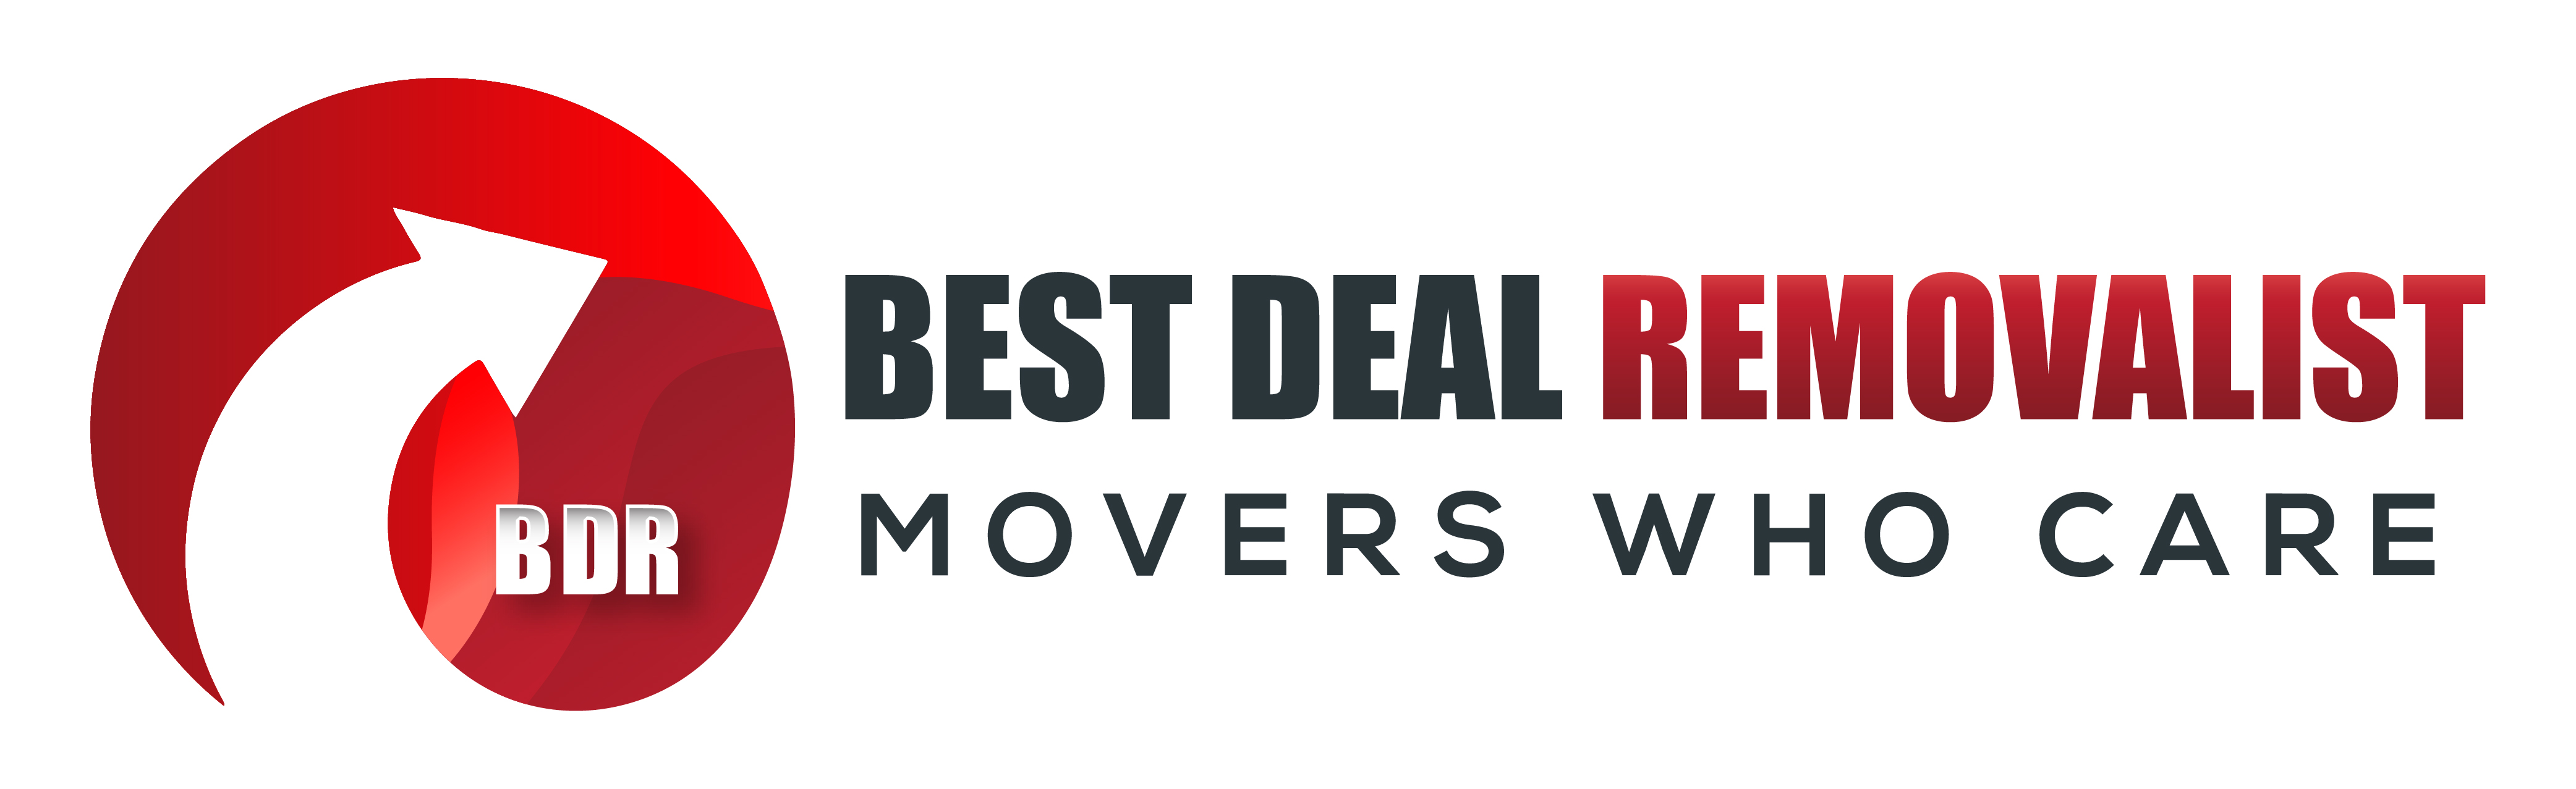 Best Deal Removalist